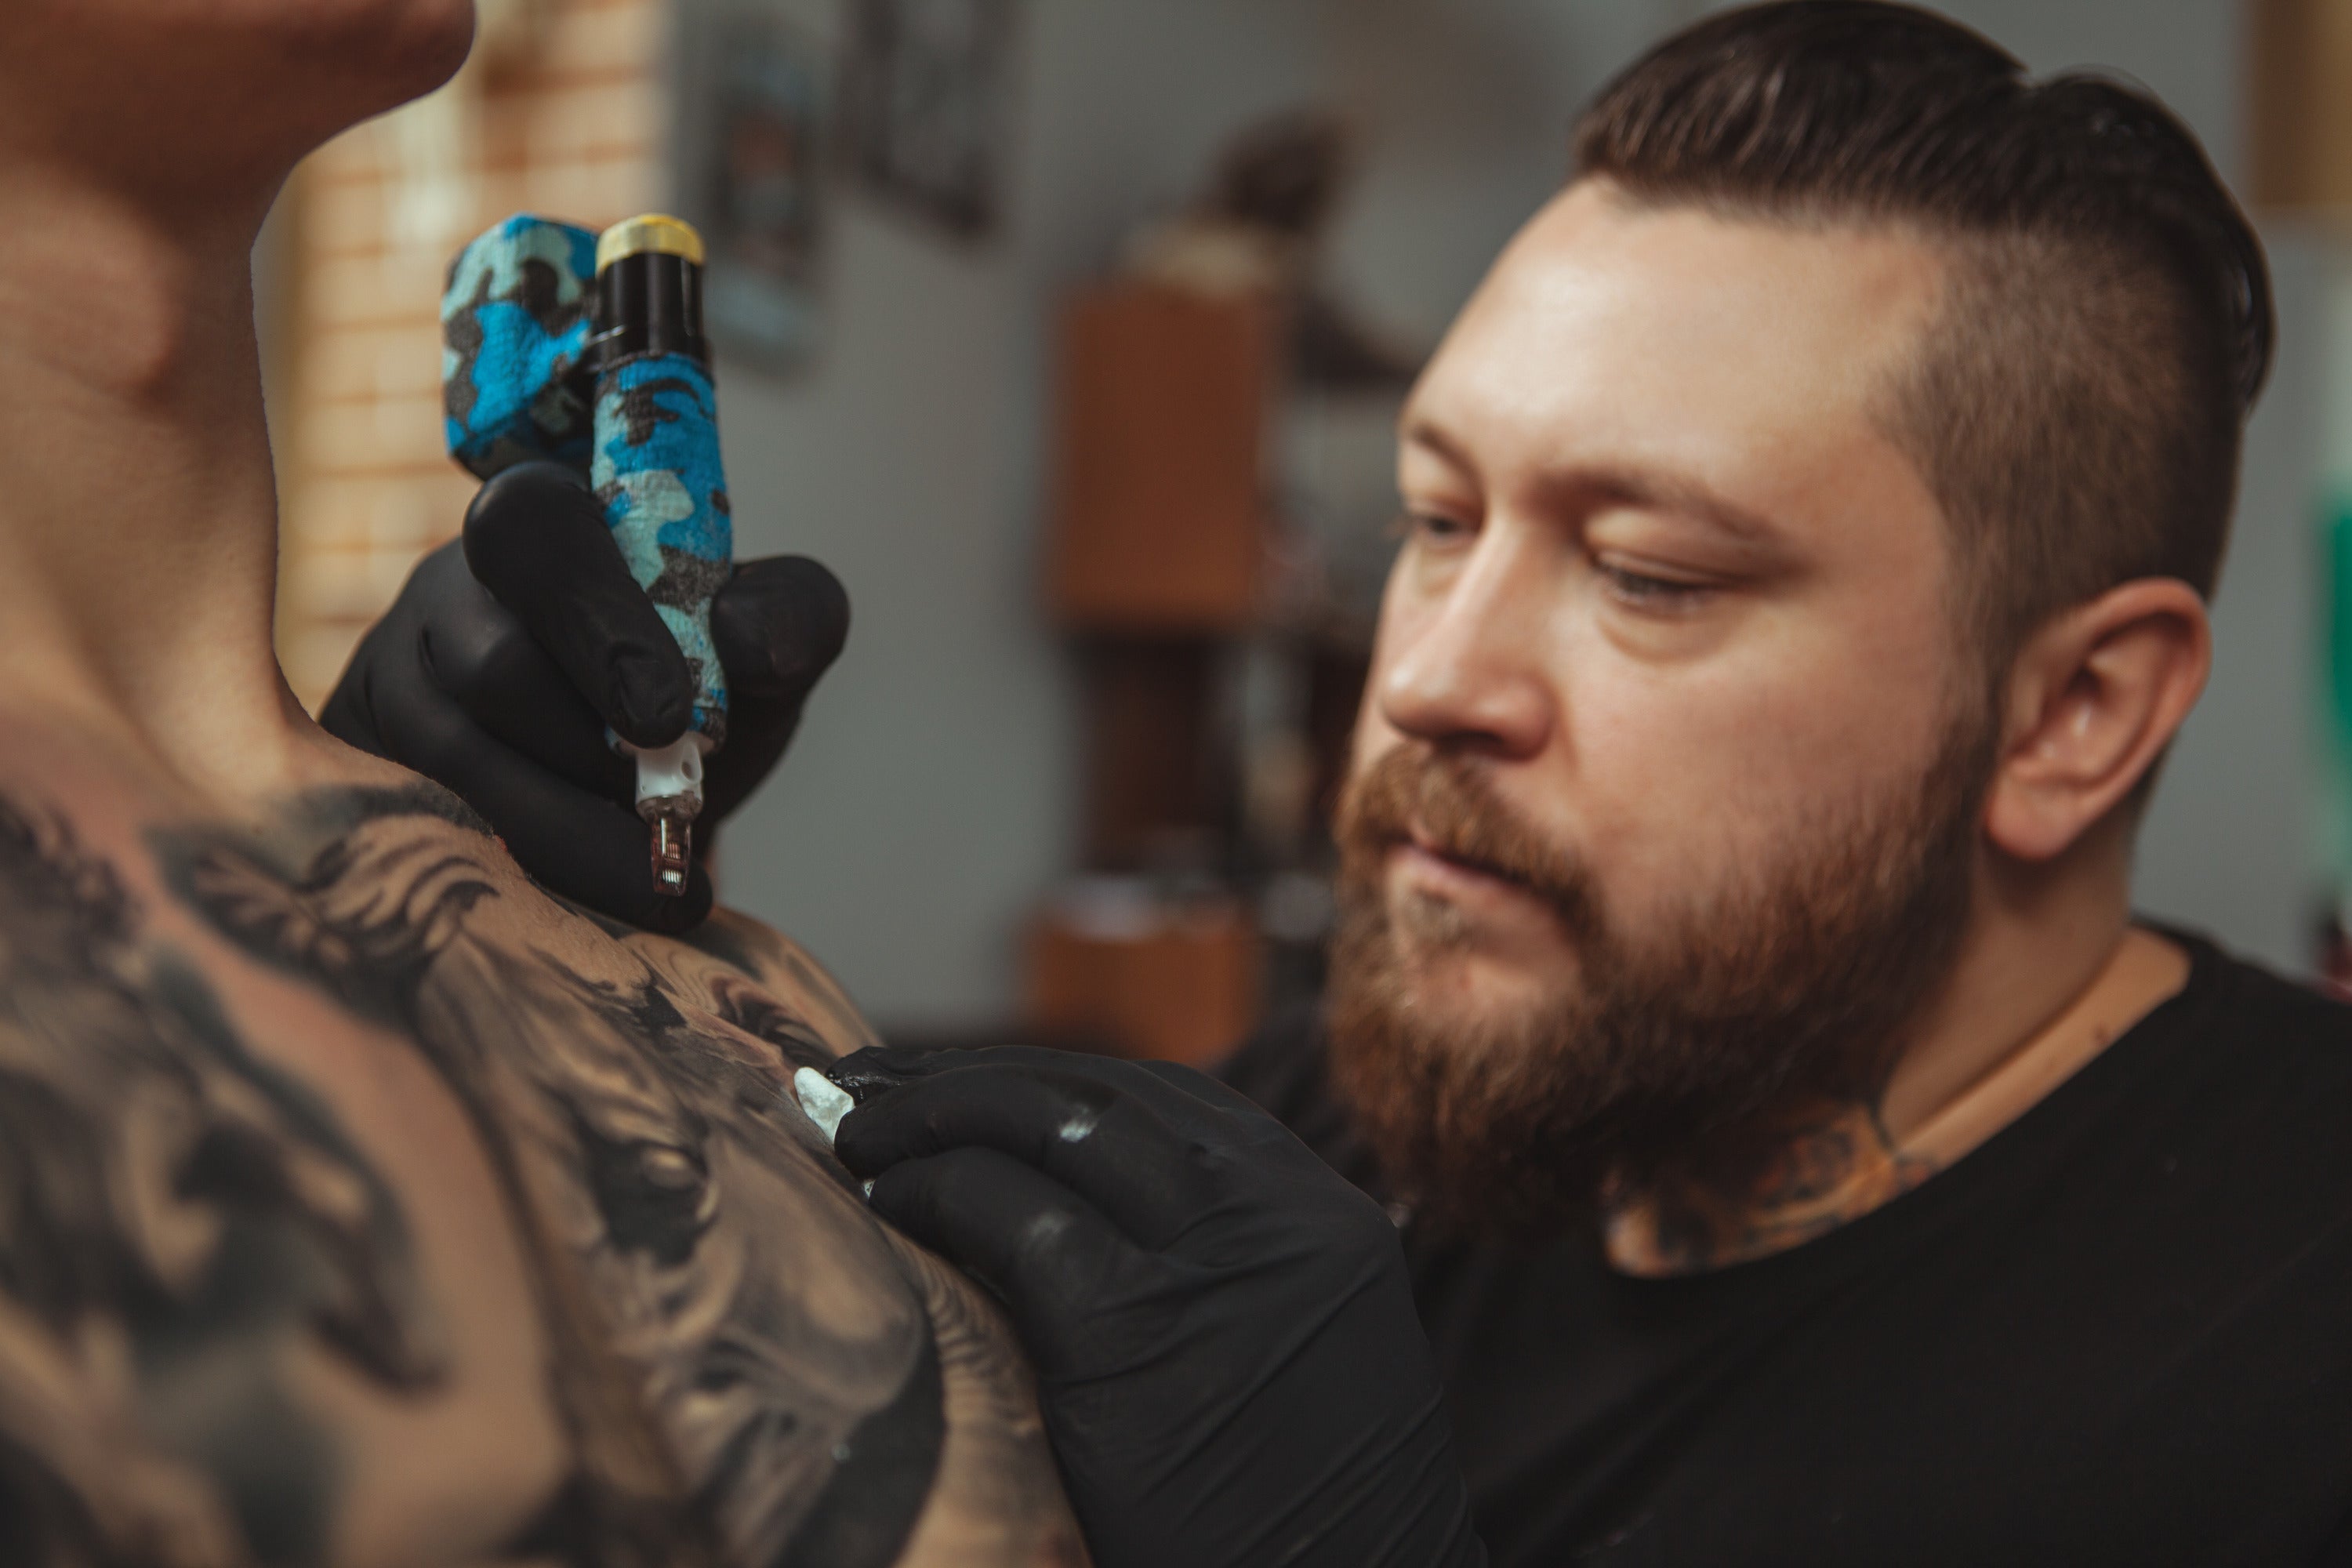 How to Minimize the Pain of Getting a Tattoo - Howcast